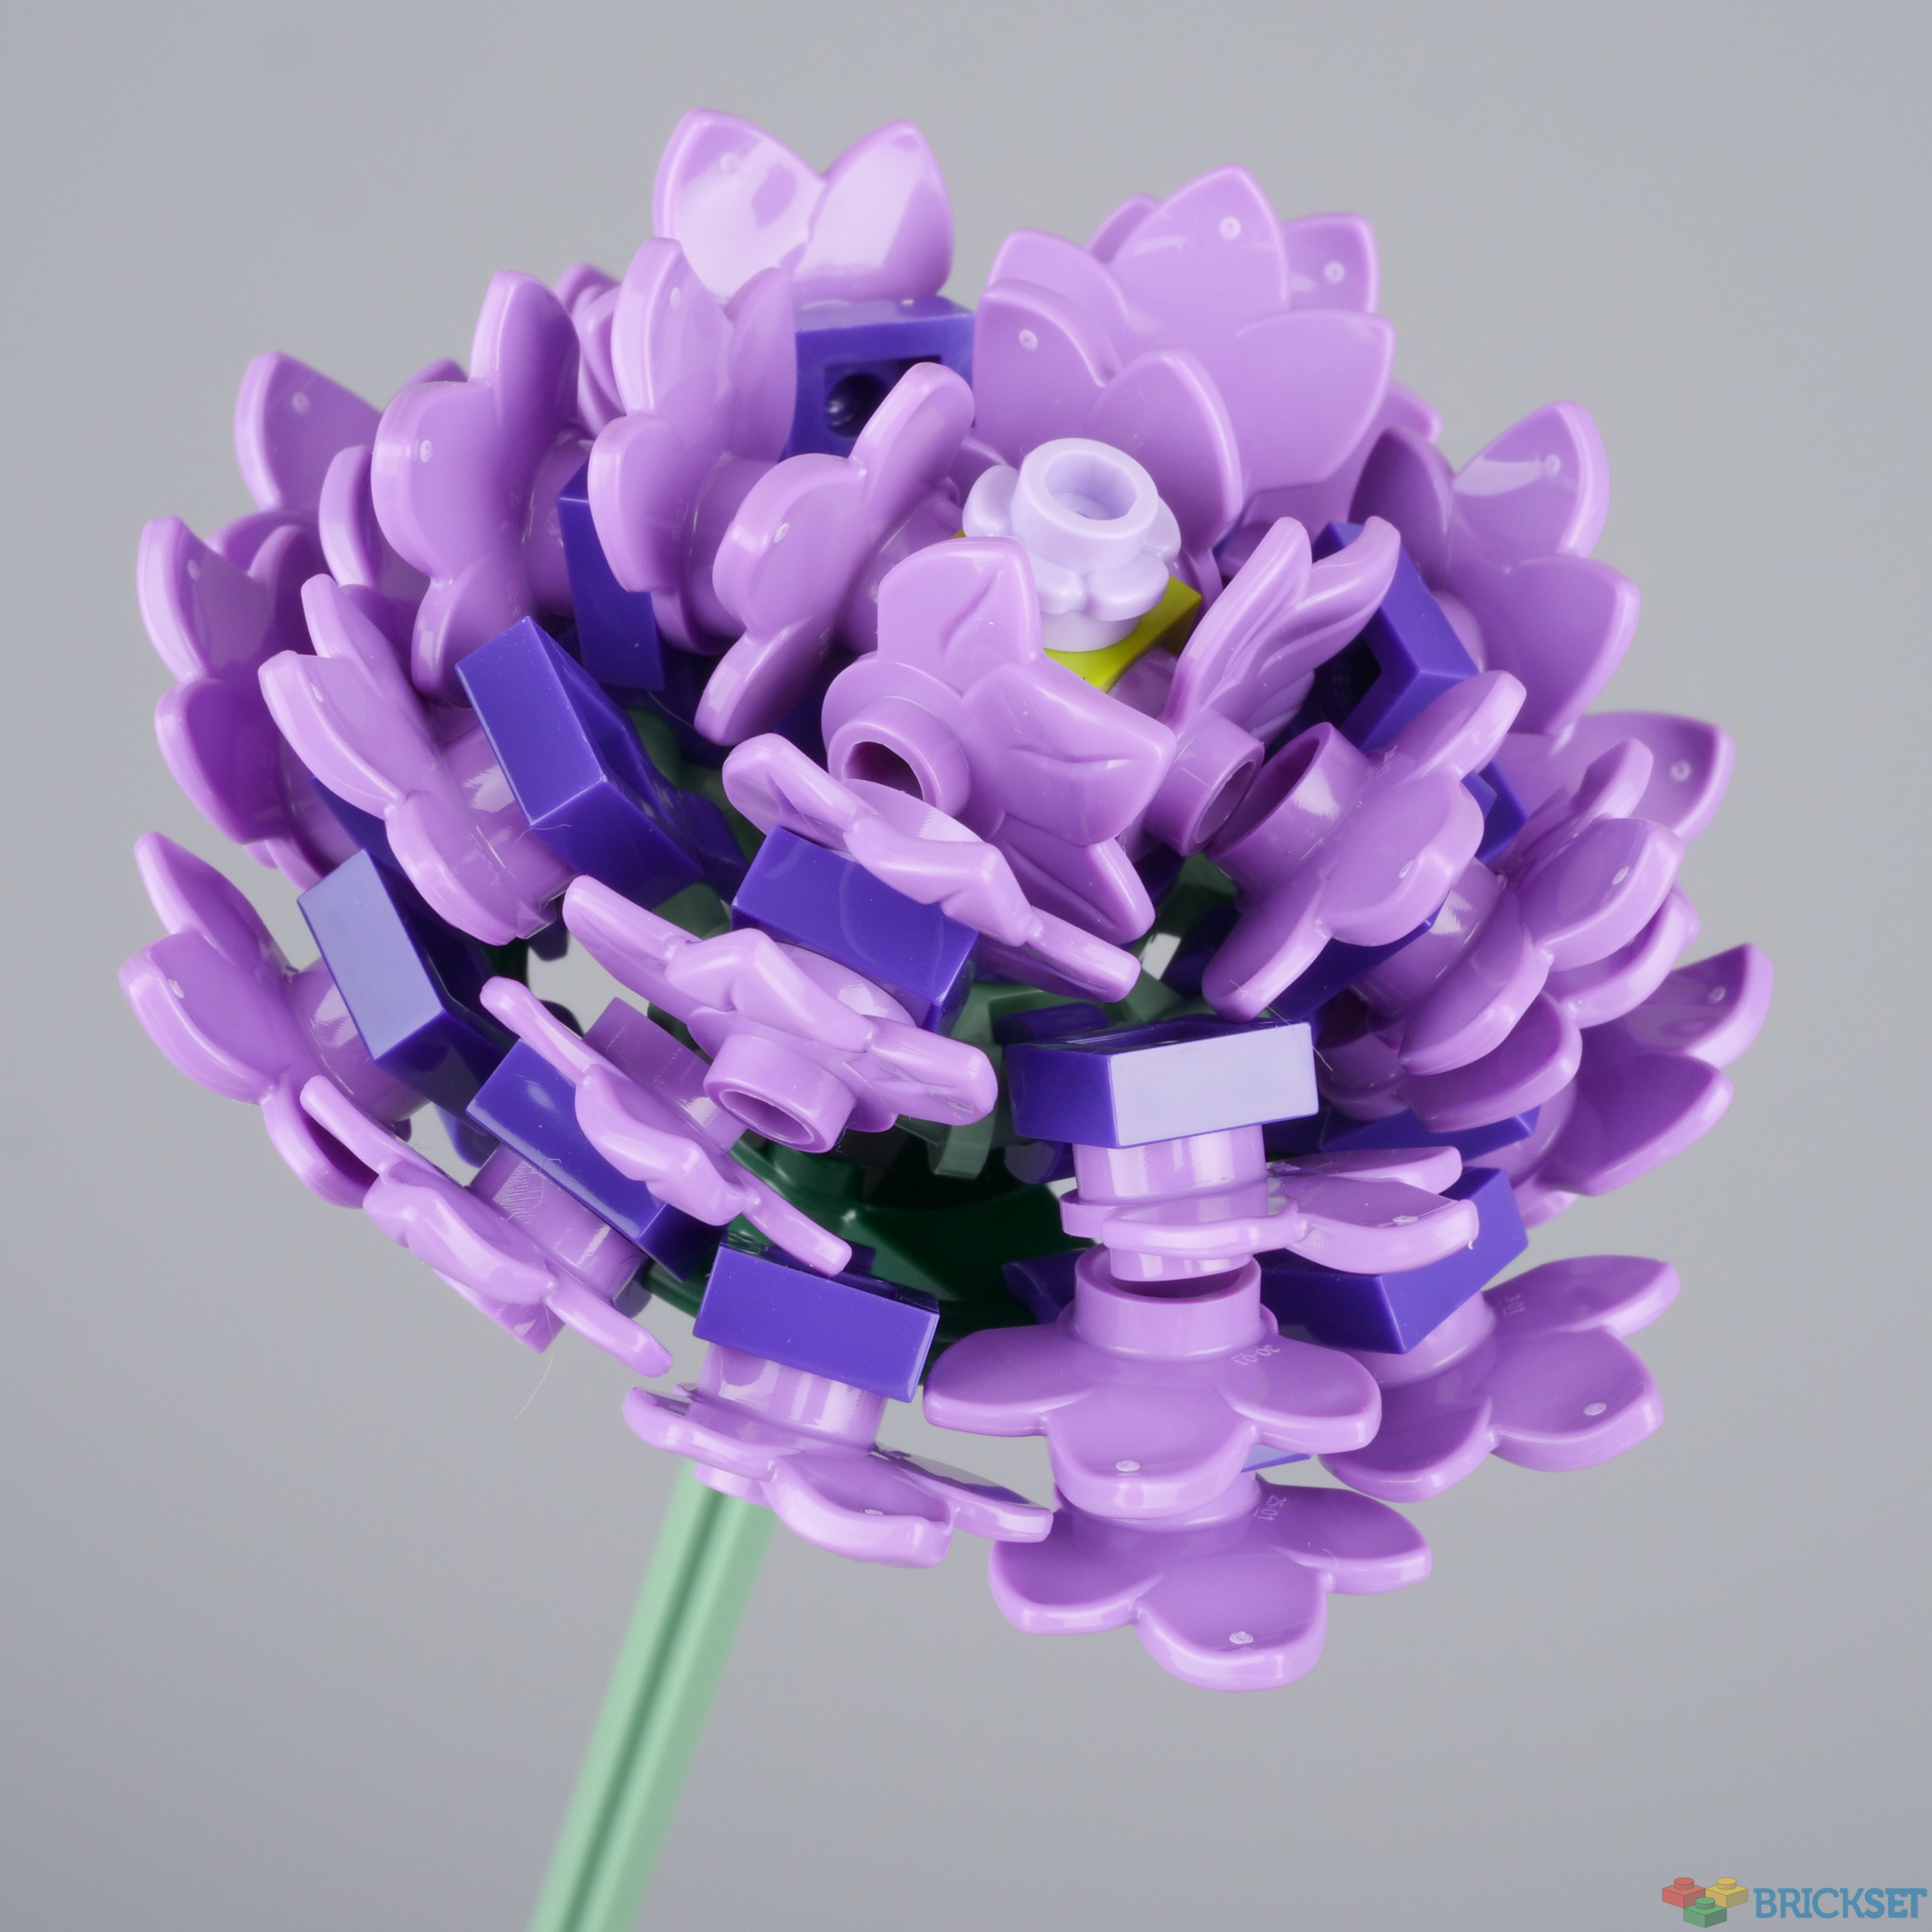 LEGO rose bouquet is BEAUTIFUL 🌹✨ #gifted by @LEGO #rlfm #reviews #10, Lego Flowers